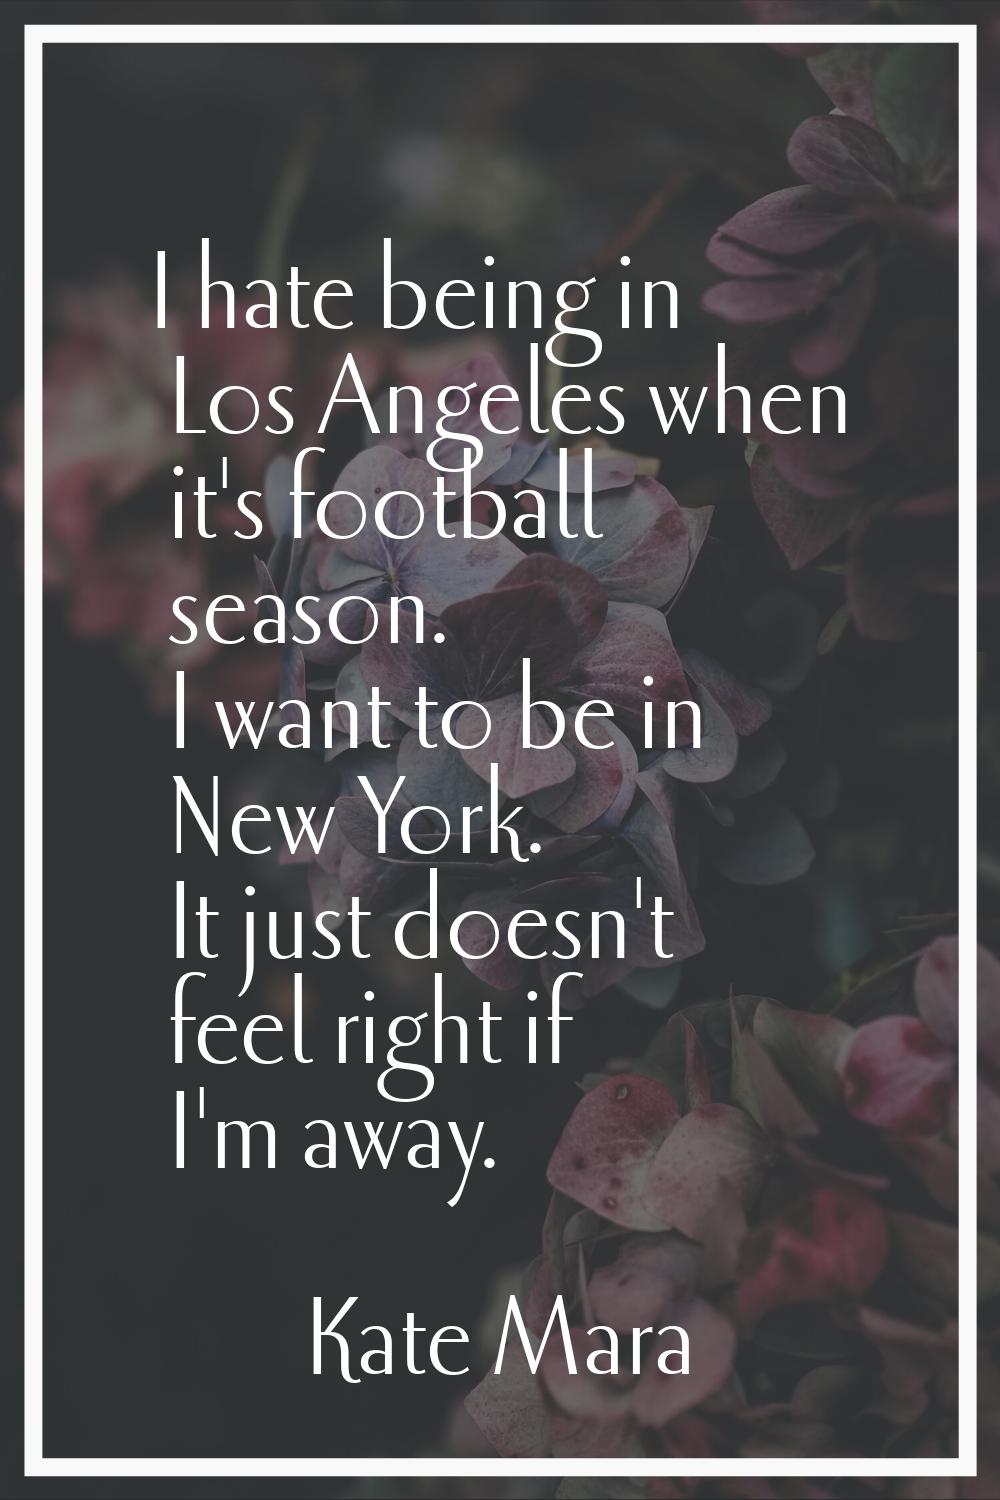 I hate being in Los Angeles when it's football season. I want to be in New York. It just doesn't fe